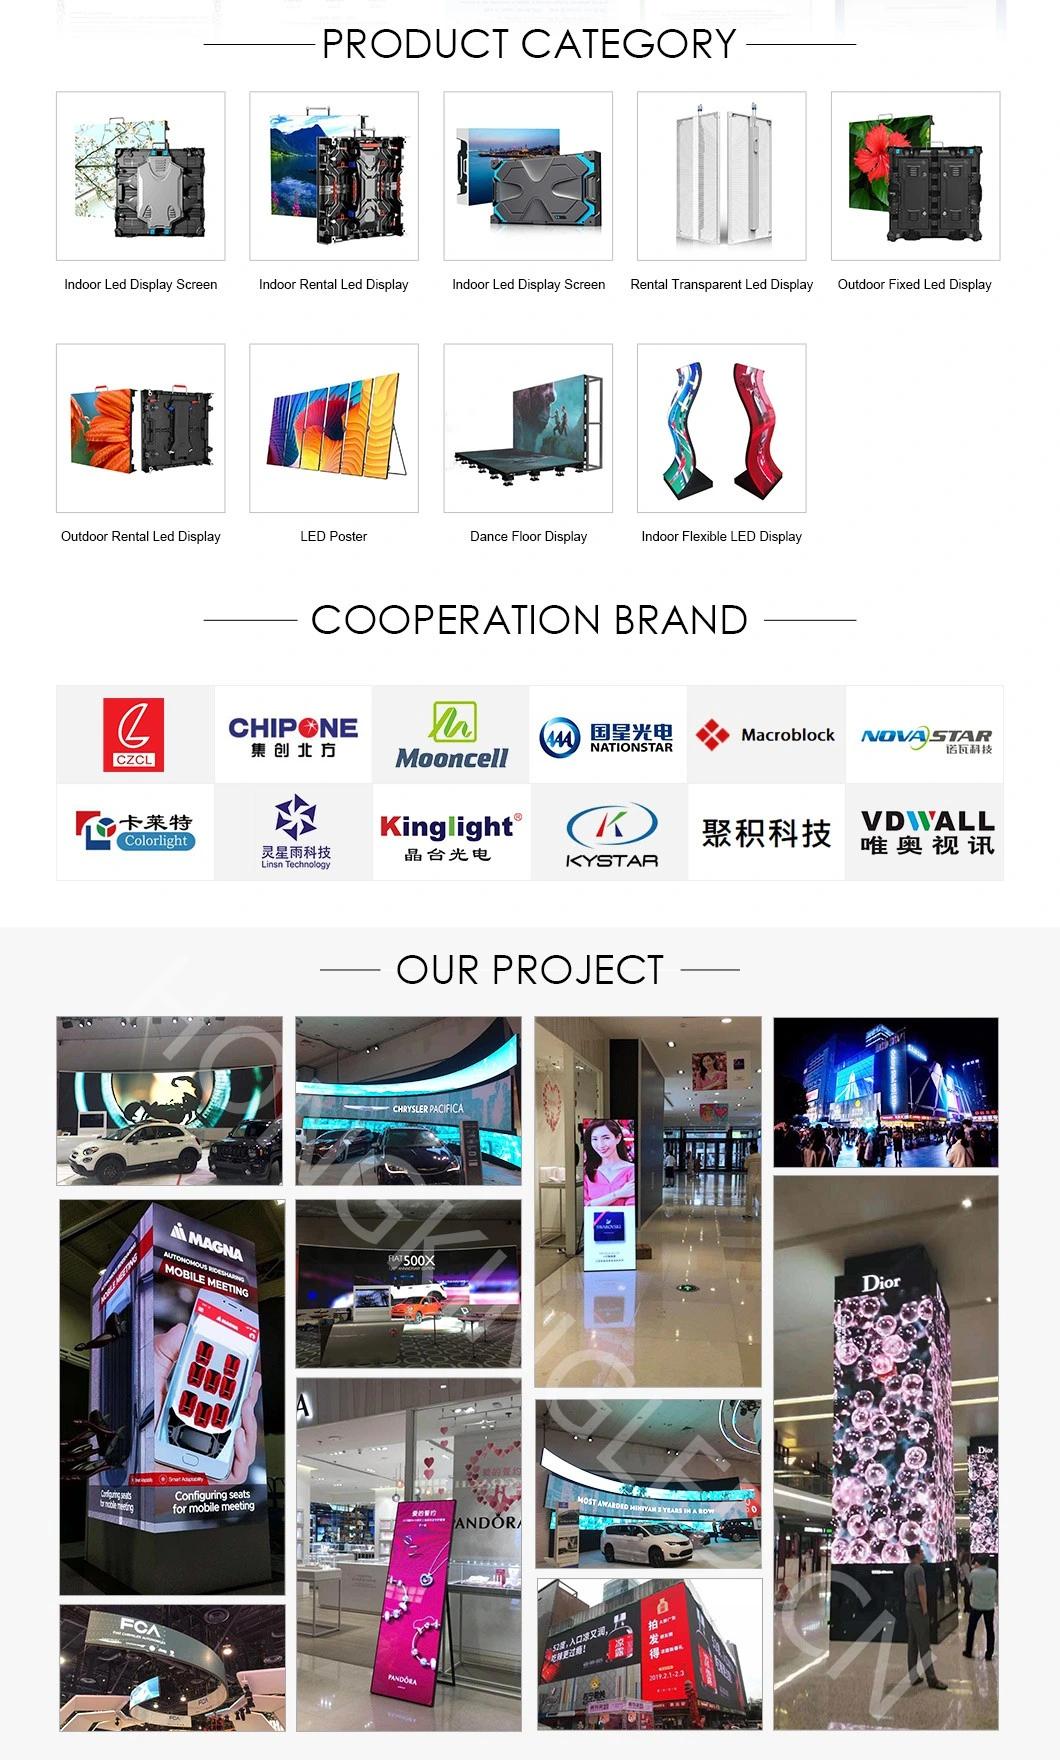 Advertising Outdoor P5 HD Full Color LED Display Screen